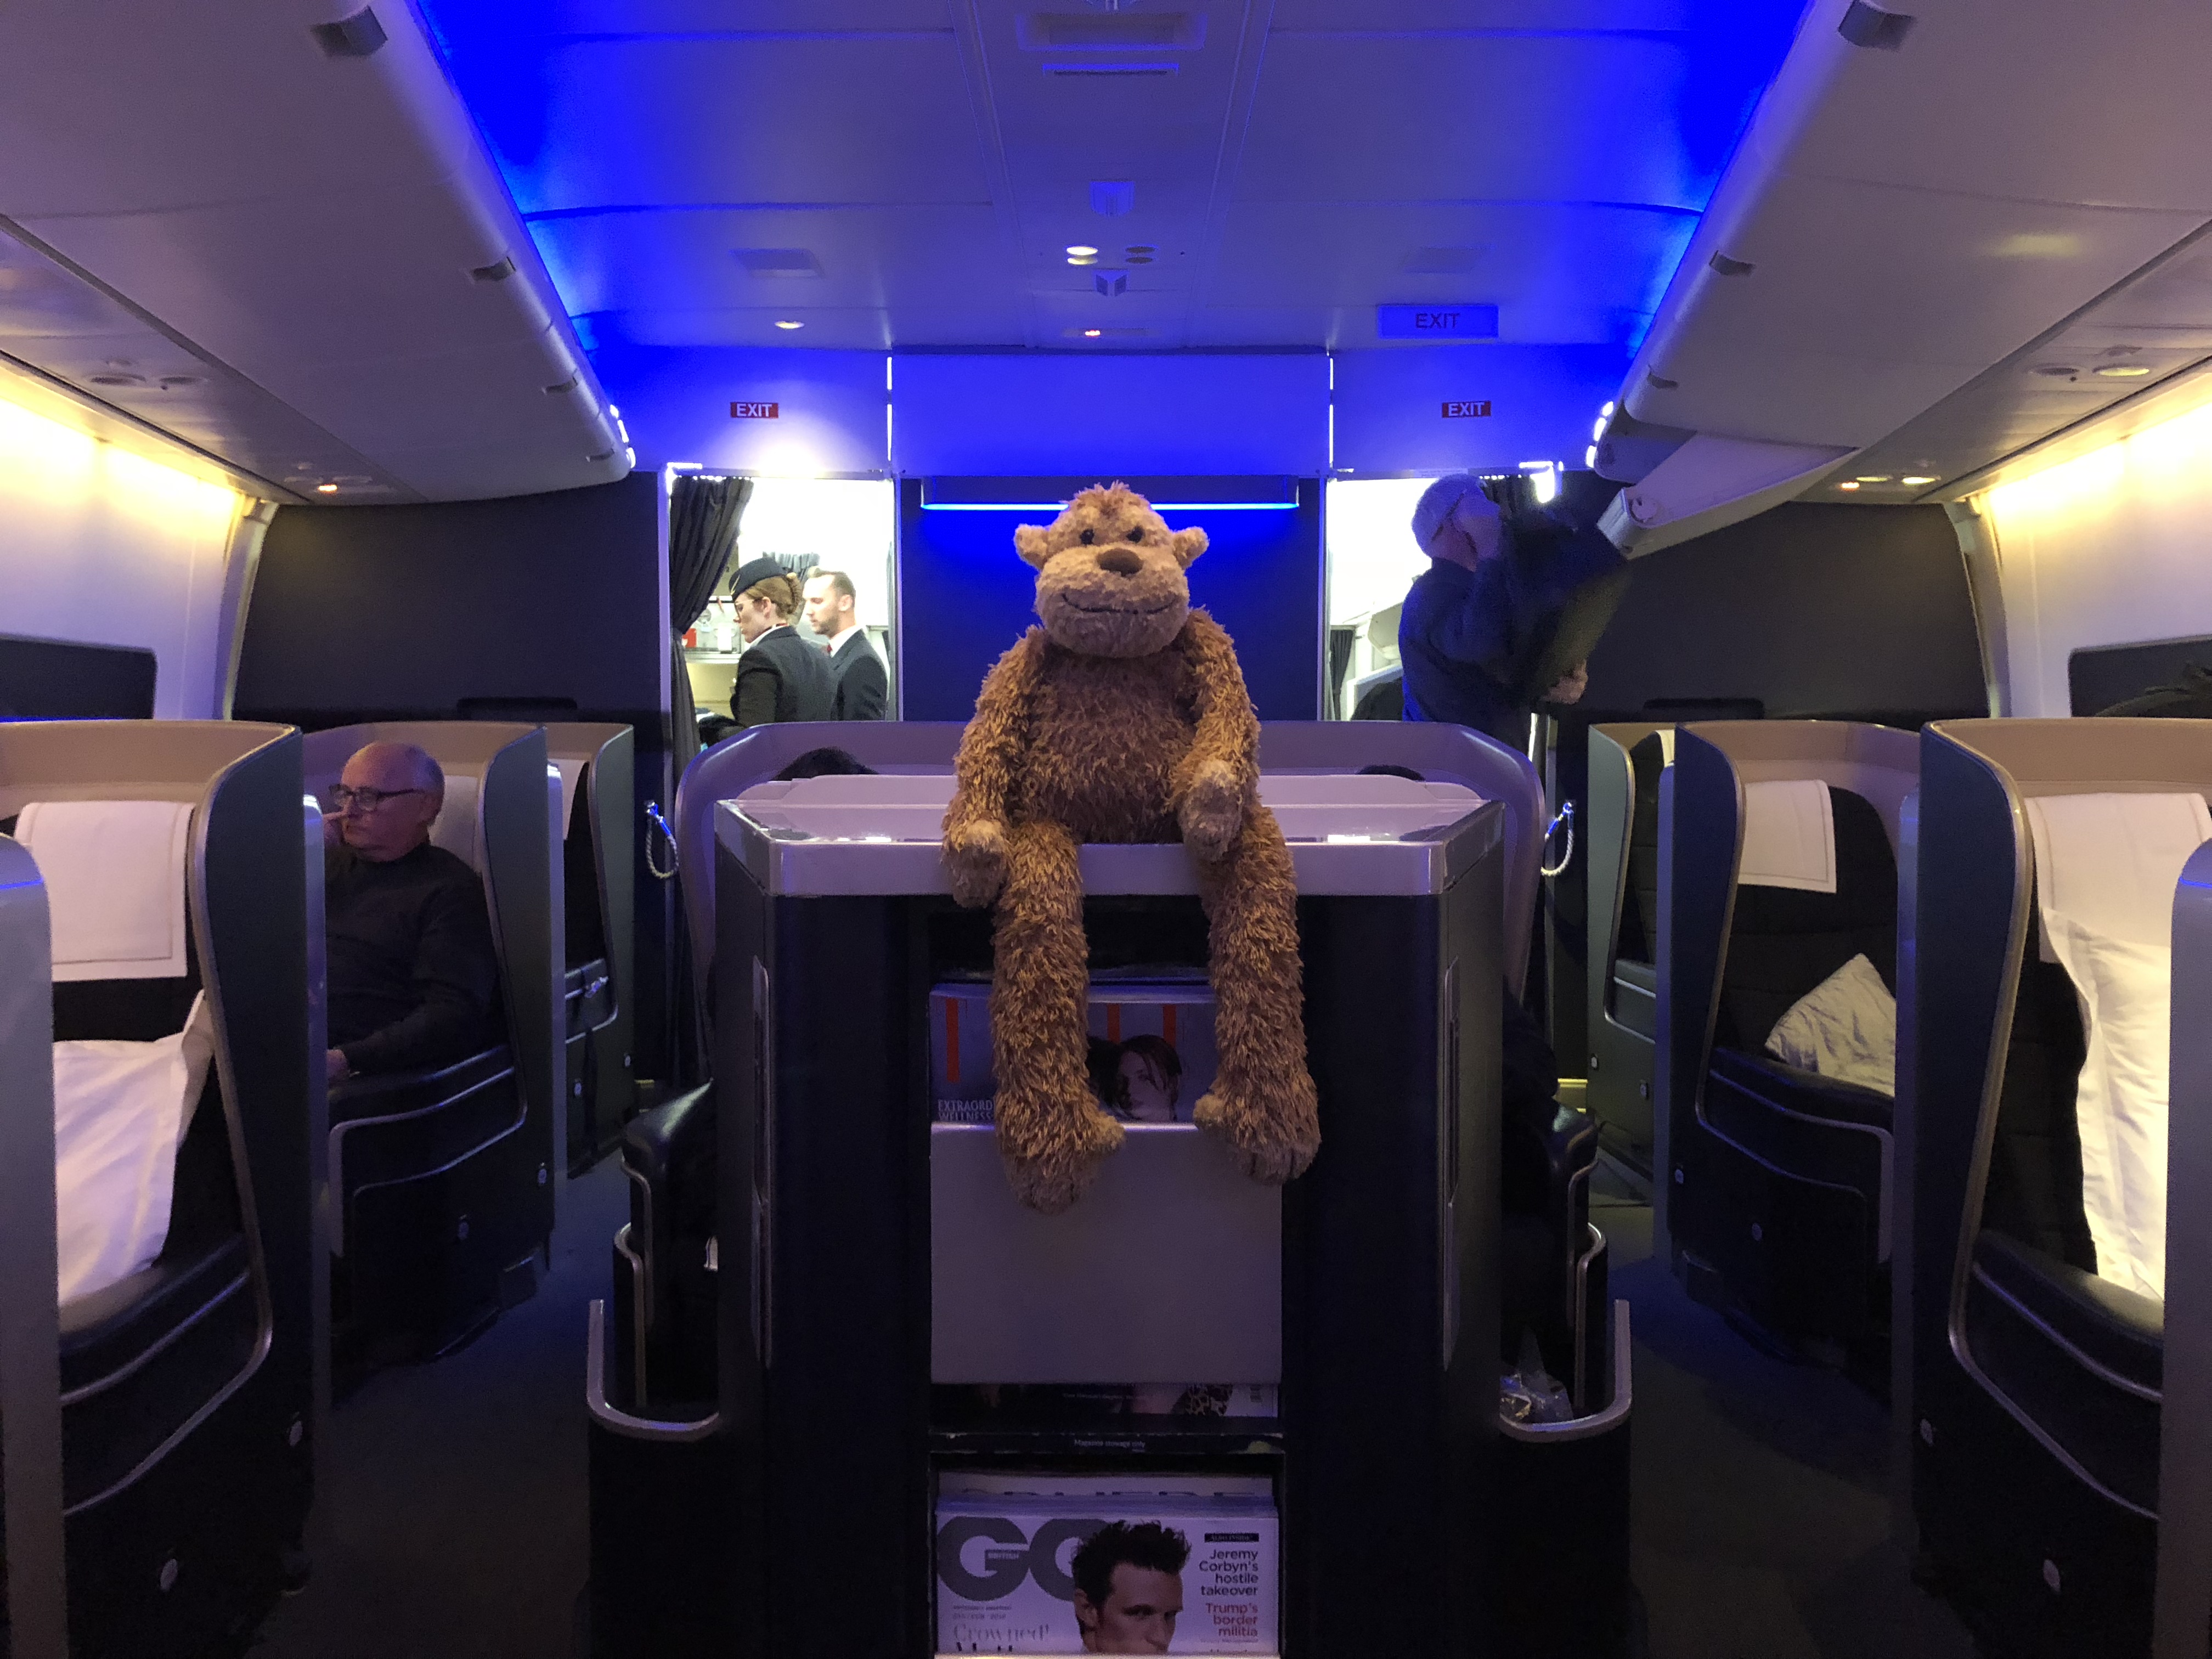 a stuffed animal on a counter in an airplane